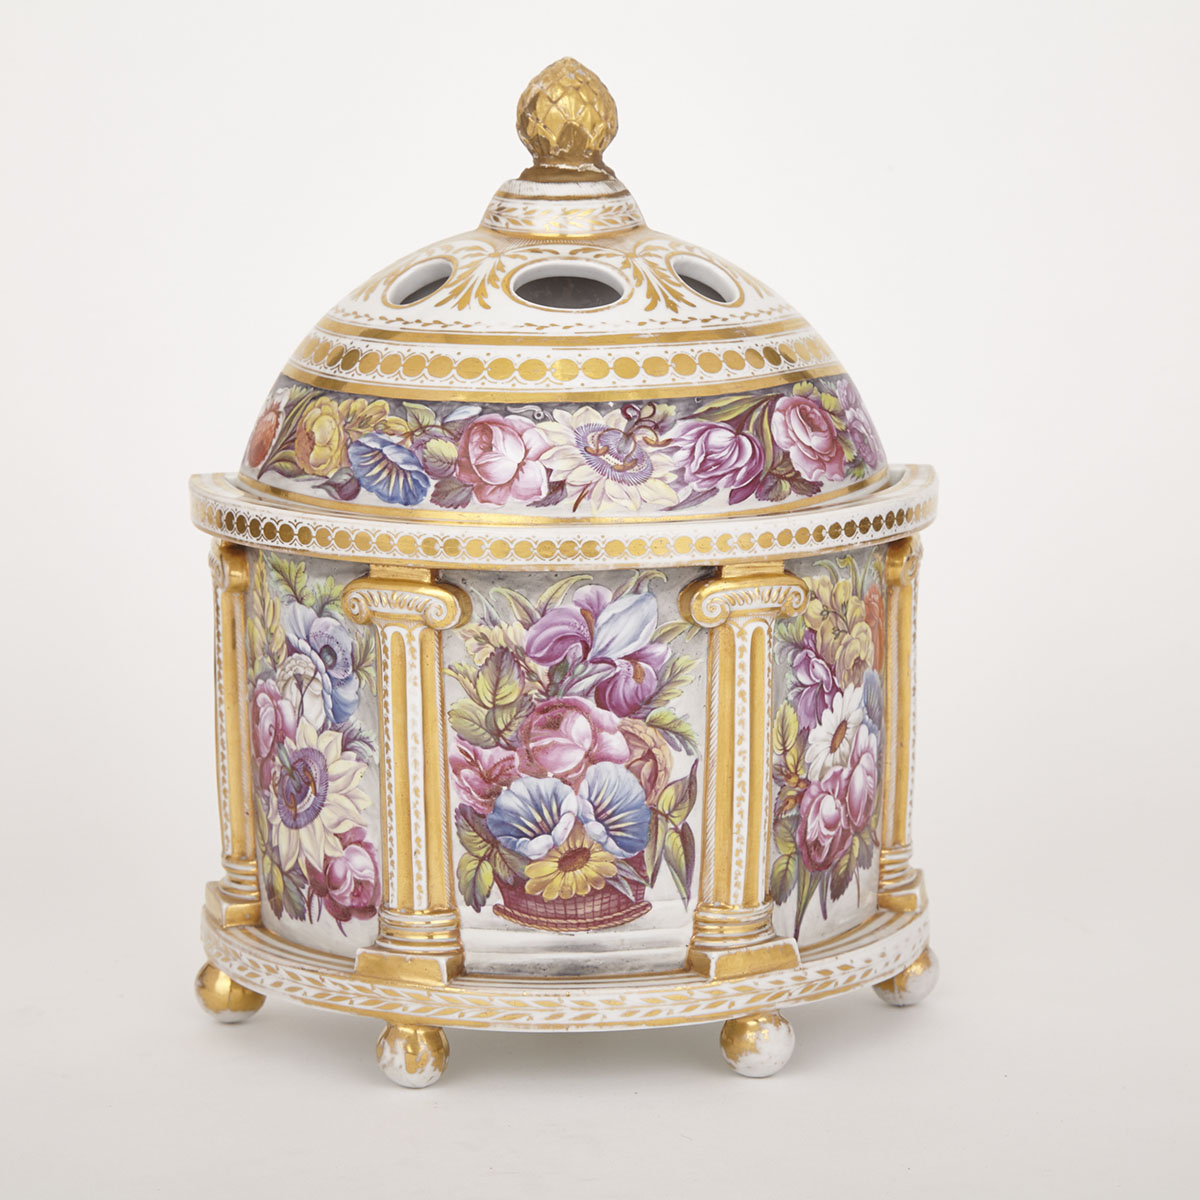 English Porcelain Bough Pot and Cover, probably Miles Mason, c.1800-10